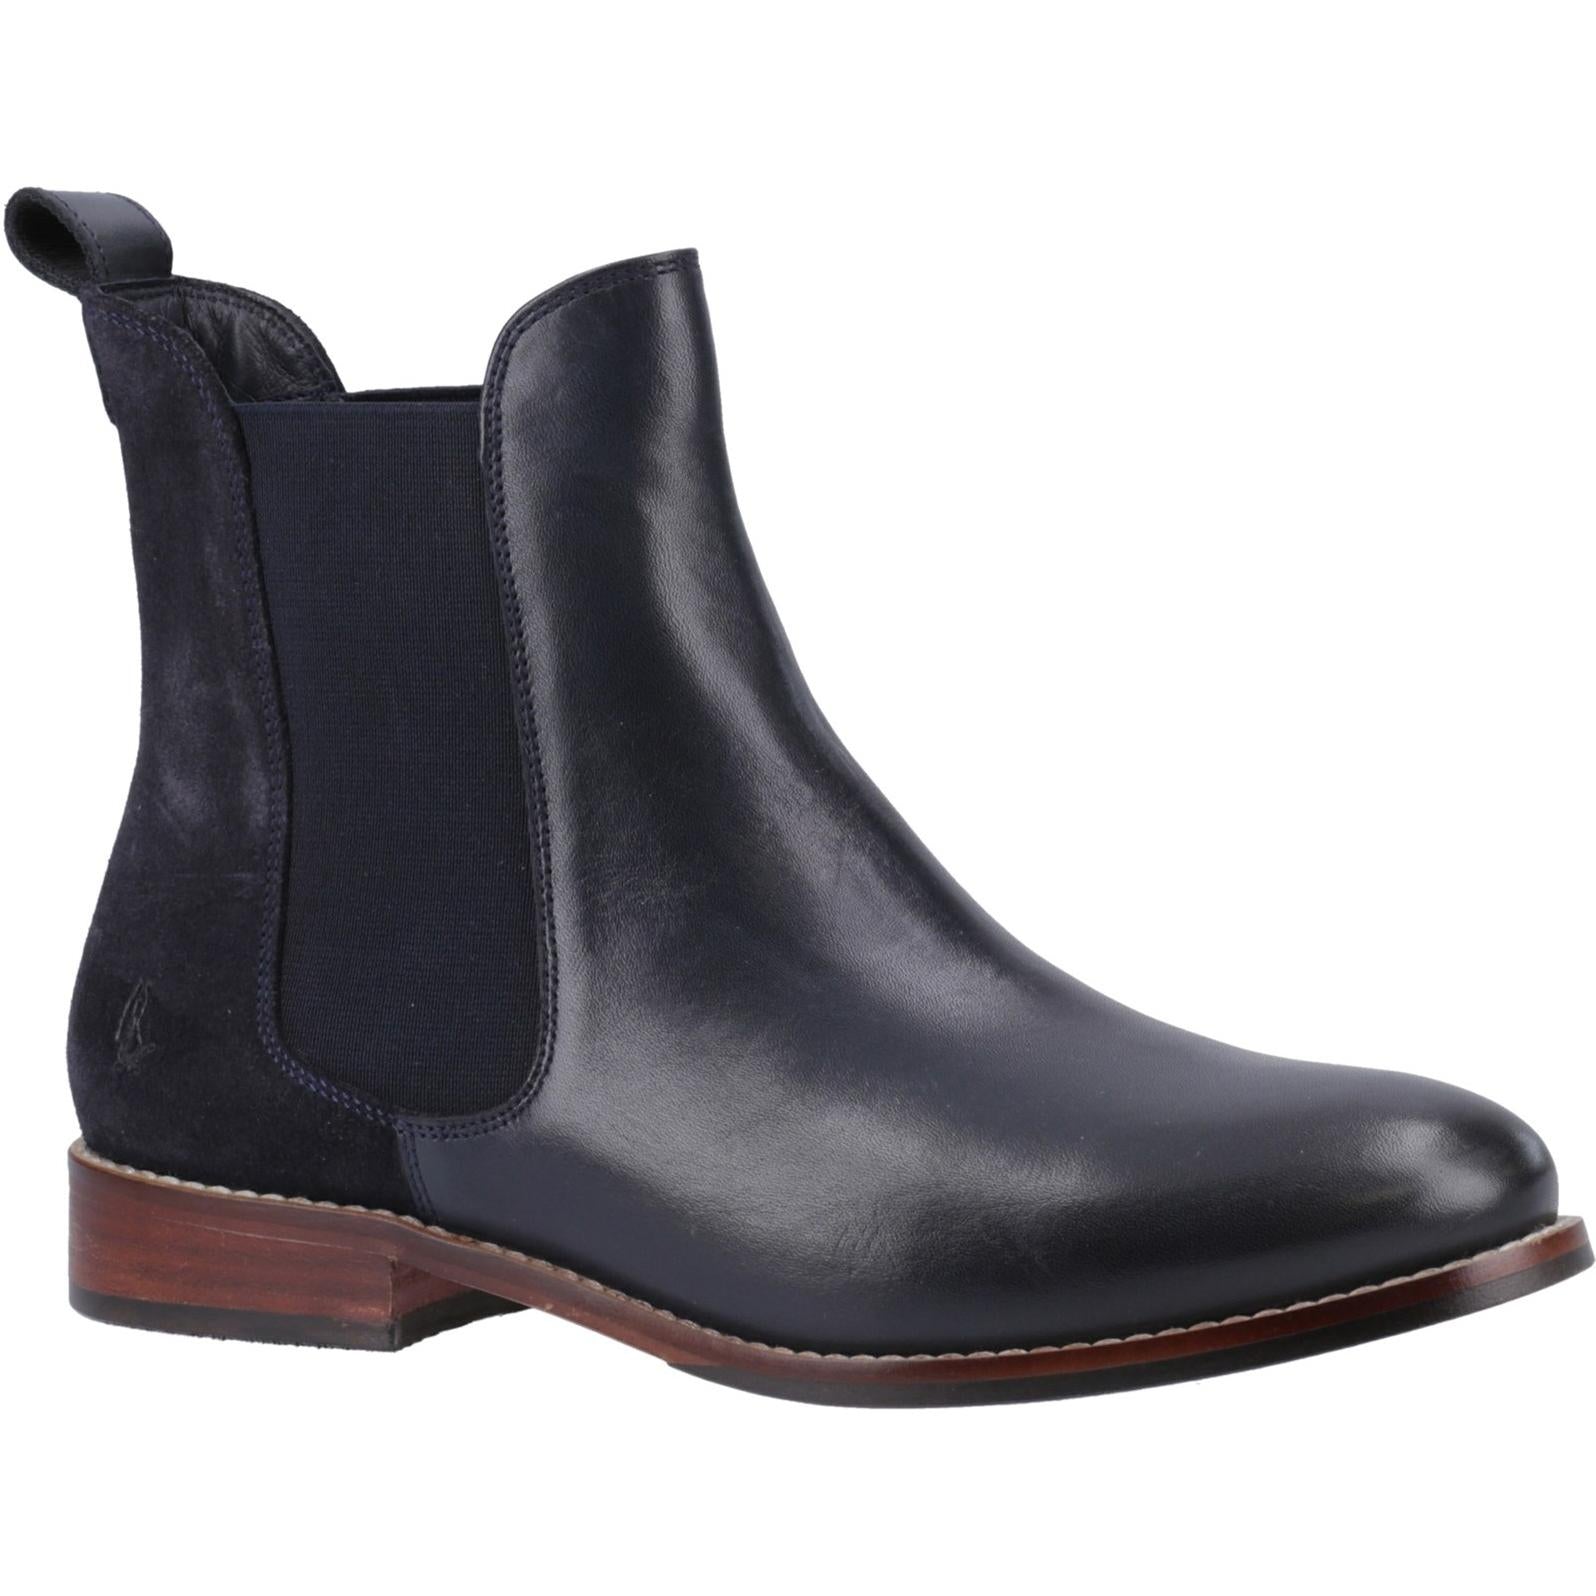 Hush Puppies Colette Boot